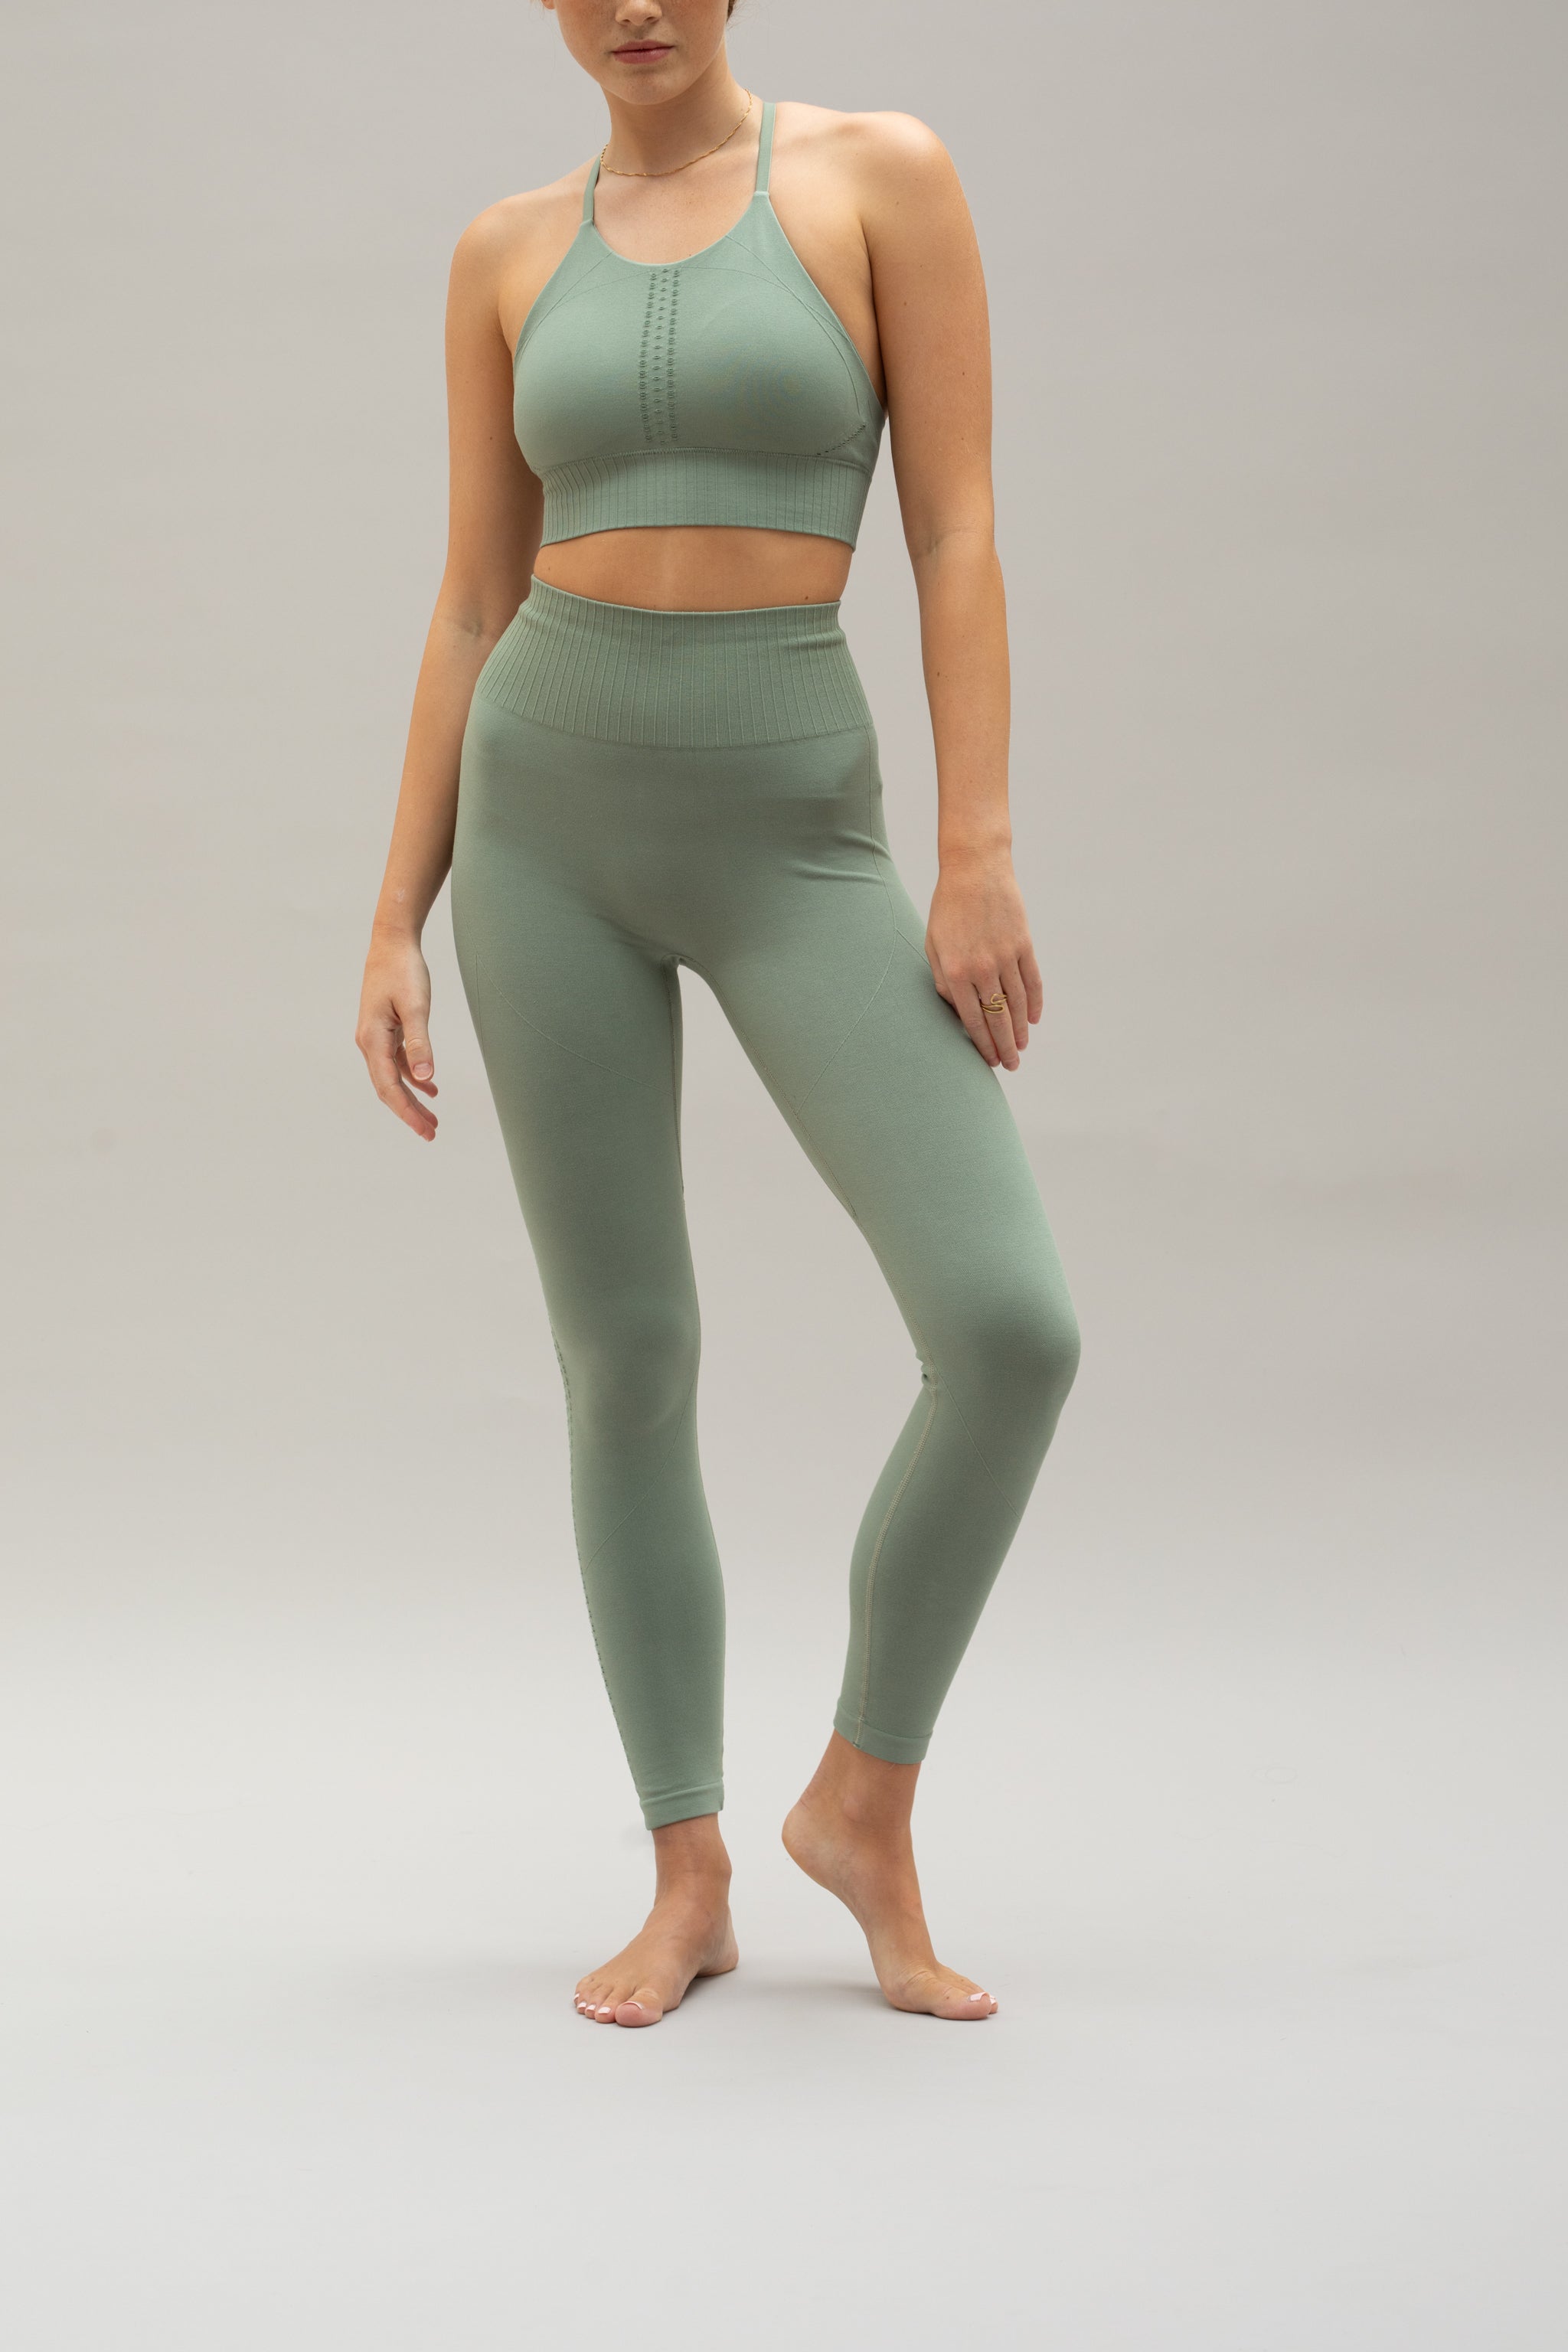 Green supportive modal cropped sports bra and green high waisted modal leggings from sustainable women's activewear brand, Jill.